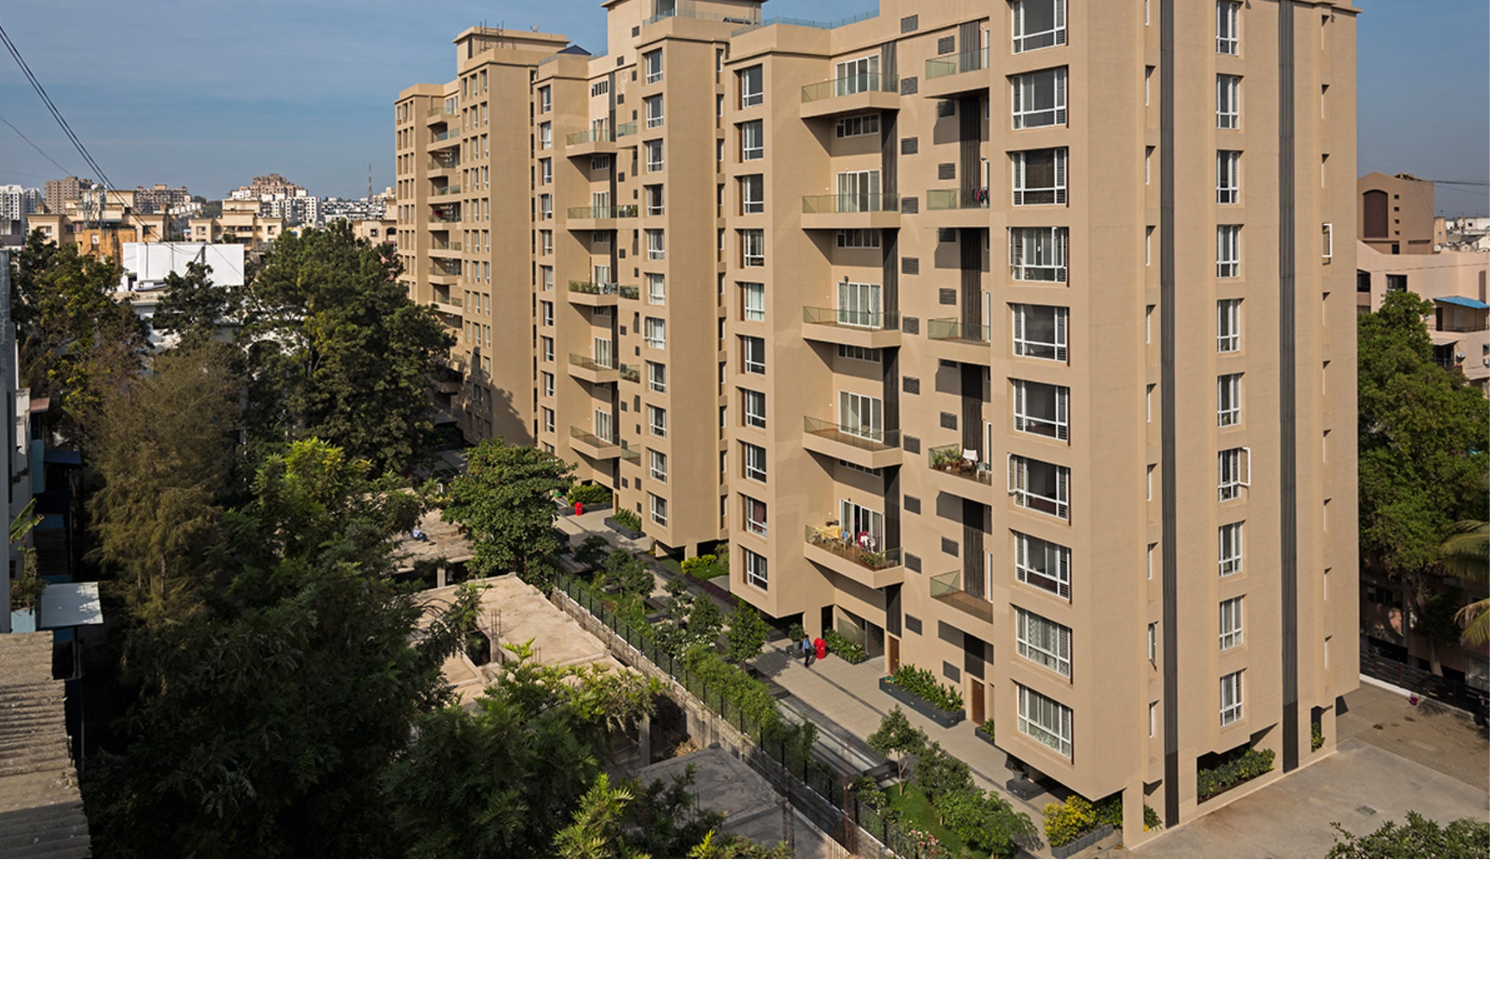 3 & 4 BHK Palatial Homes
It’s not every day that you come across a location that practically offers 